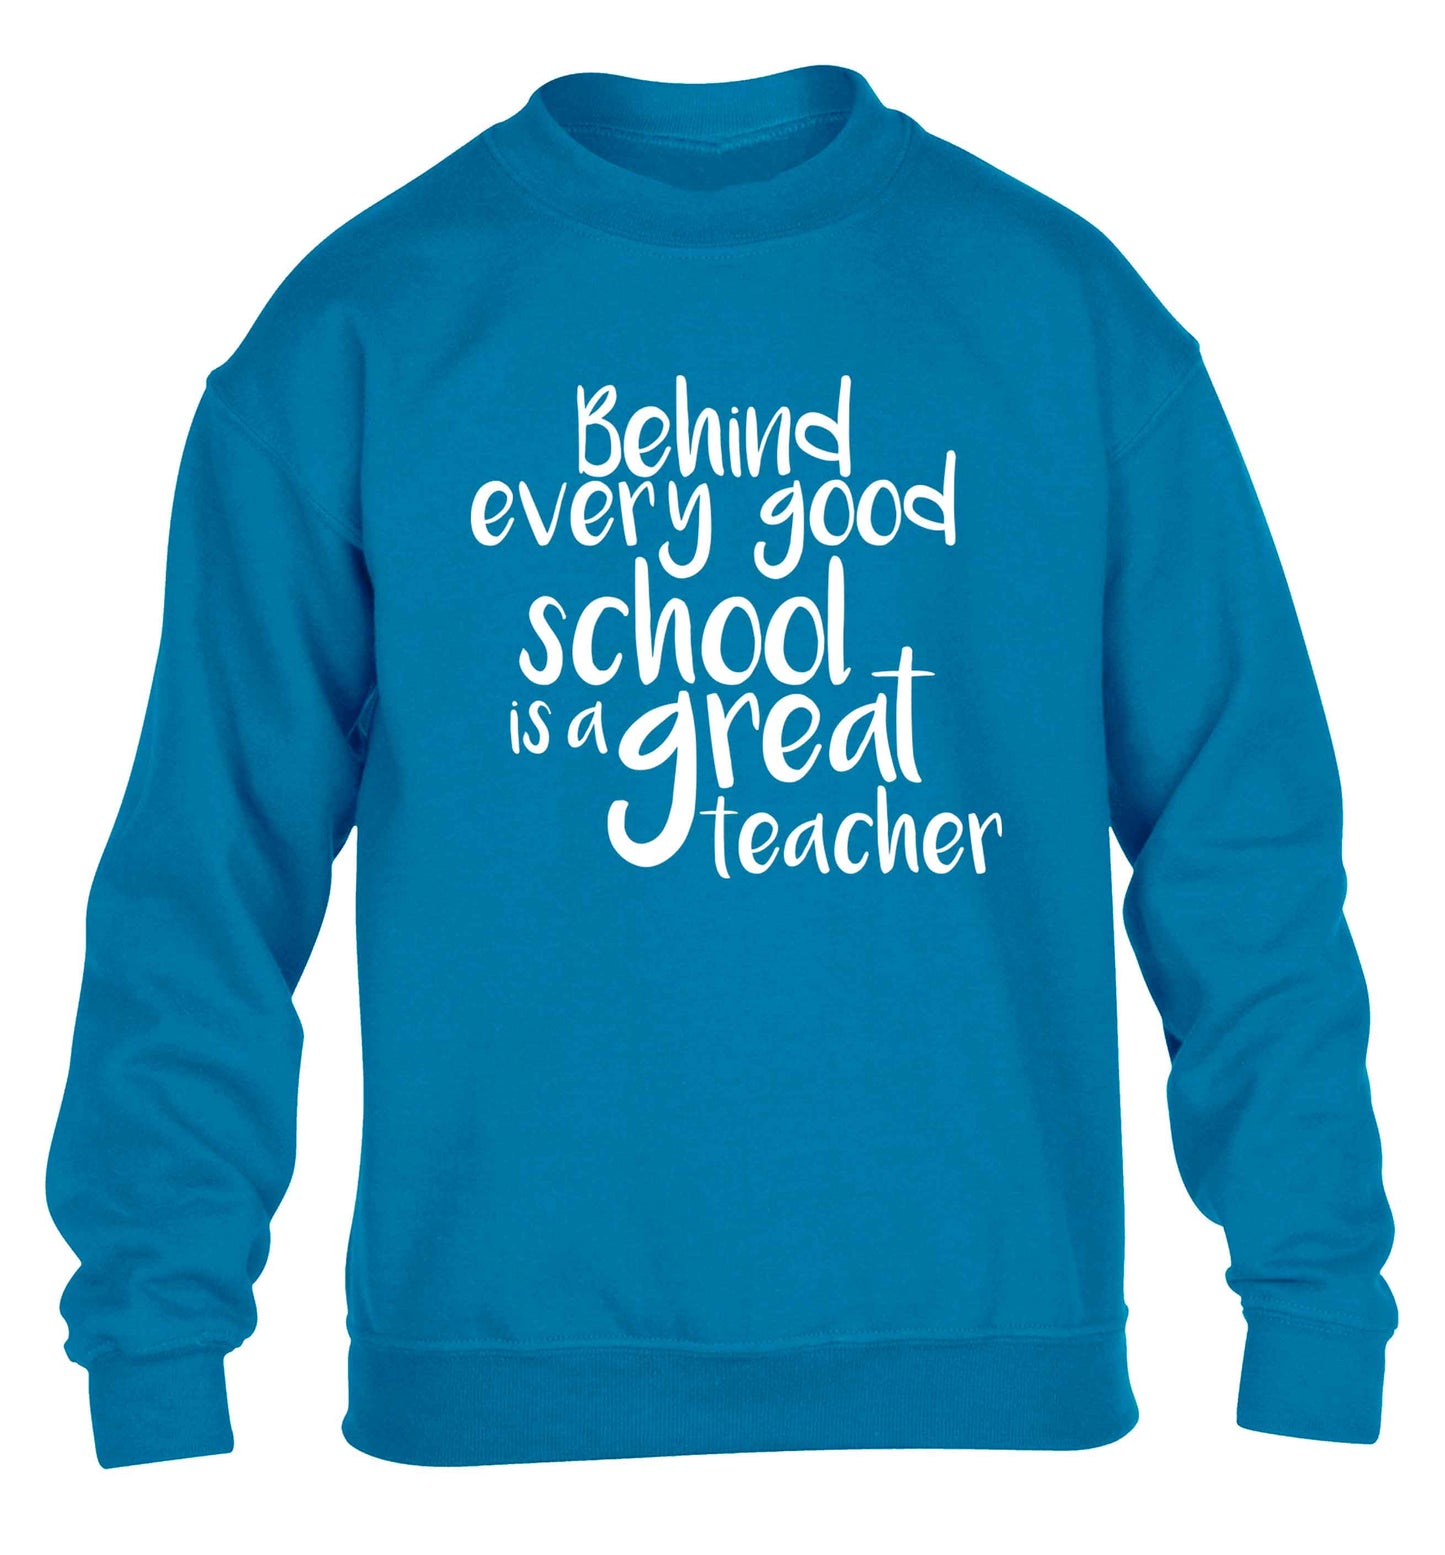 Behind every good school is a great teacher children's blue sweater 12-13 Years